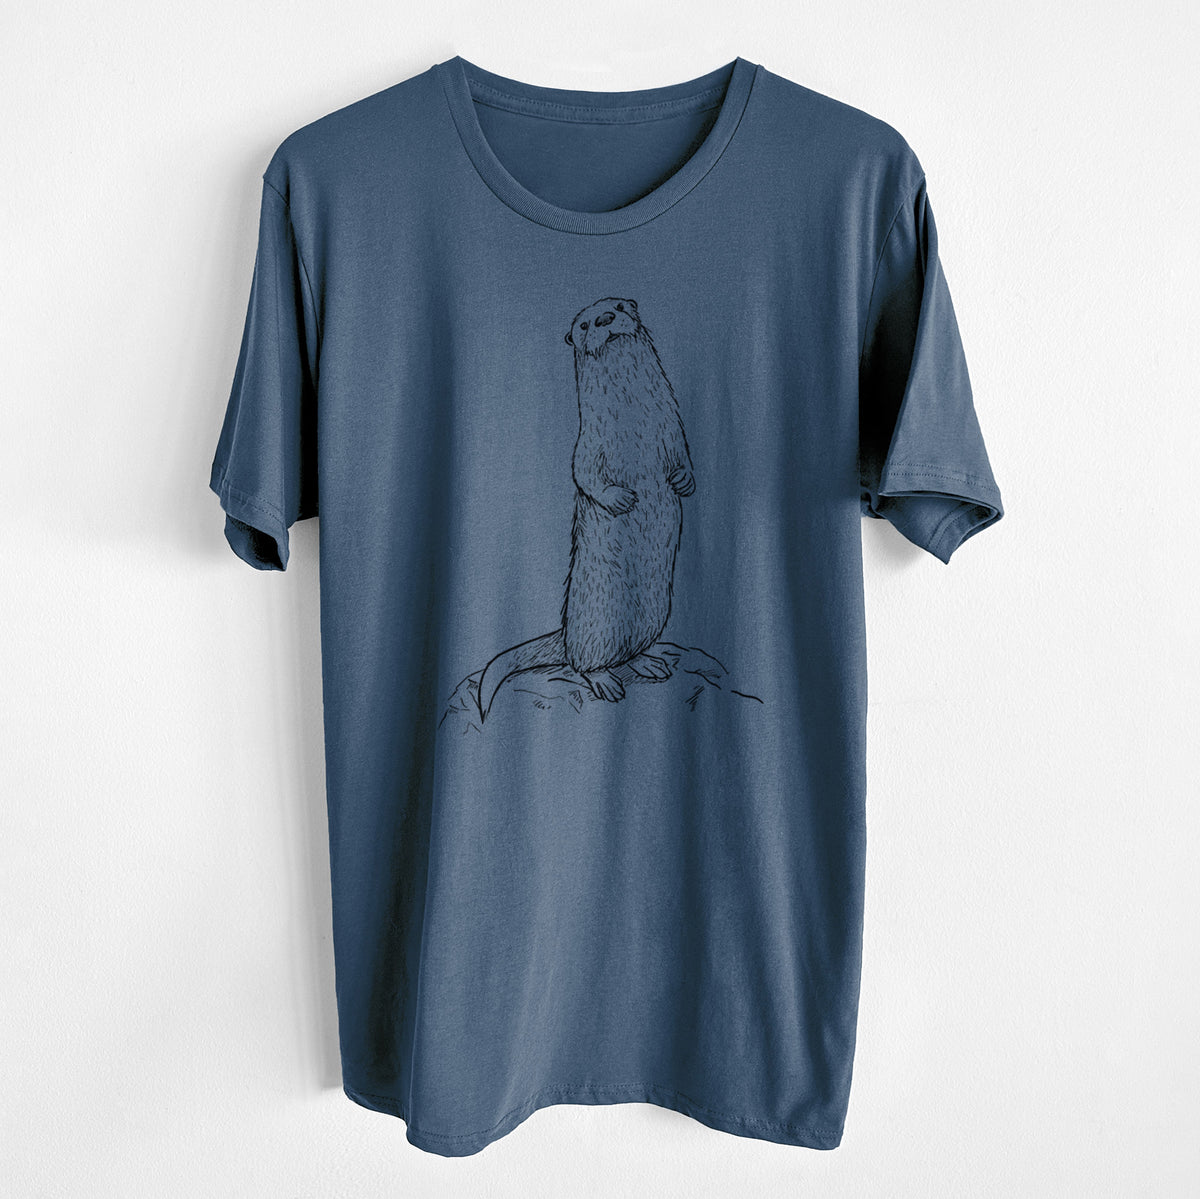 North American River Otter - Lontra canadensis - Unisex Crewneck - Made in USA - 100% Organic Cotton